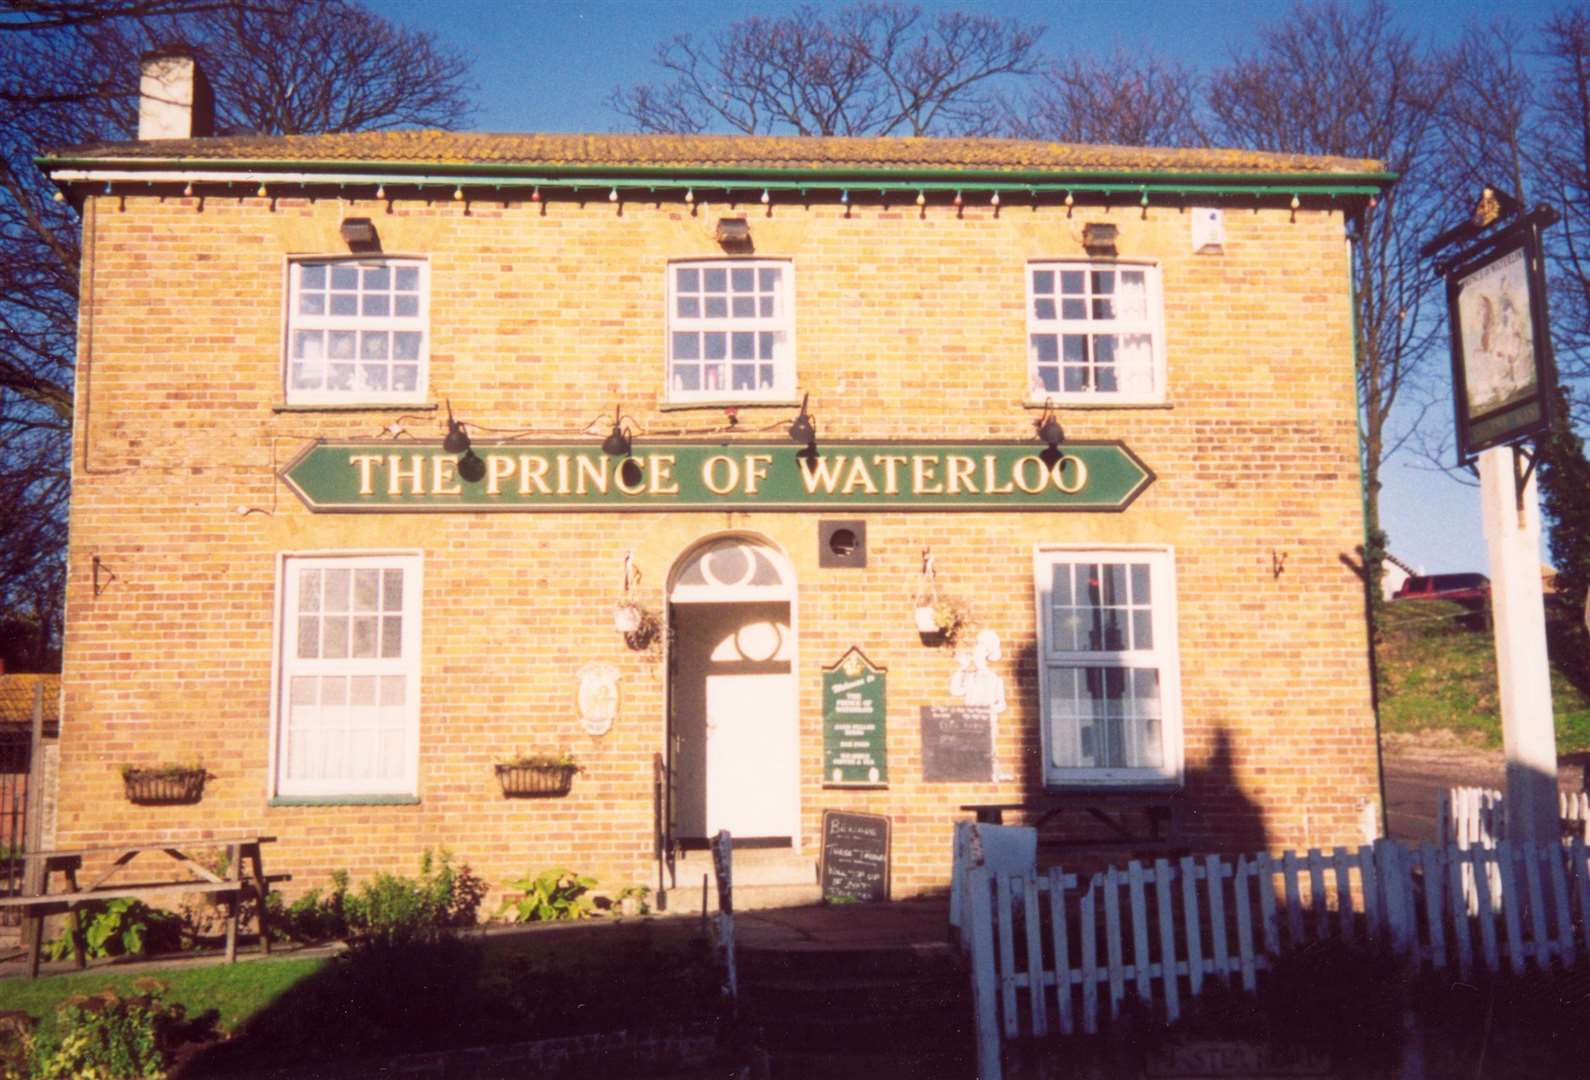 The former Prince of Waterloo pub, Minster